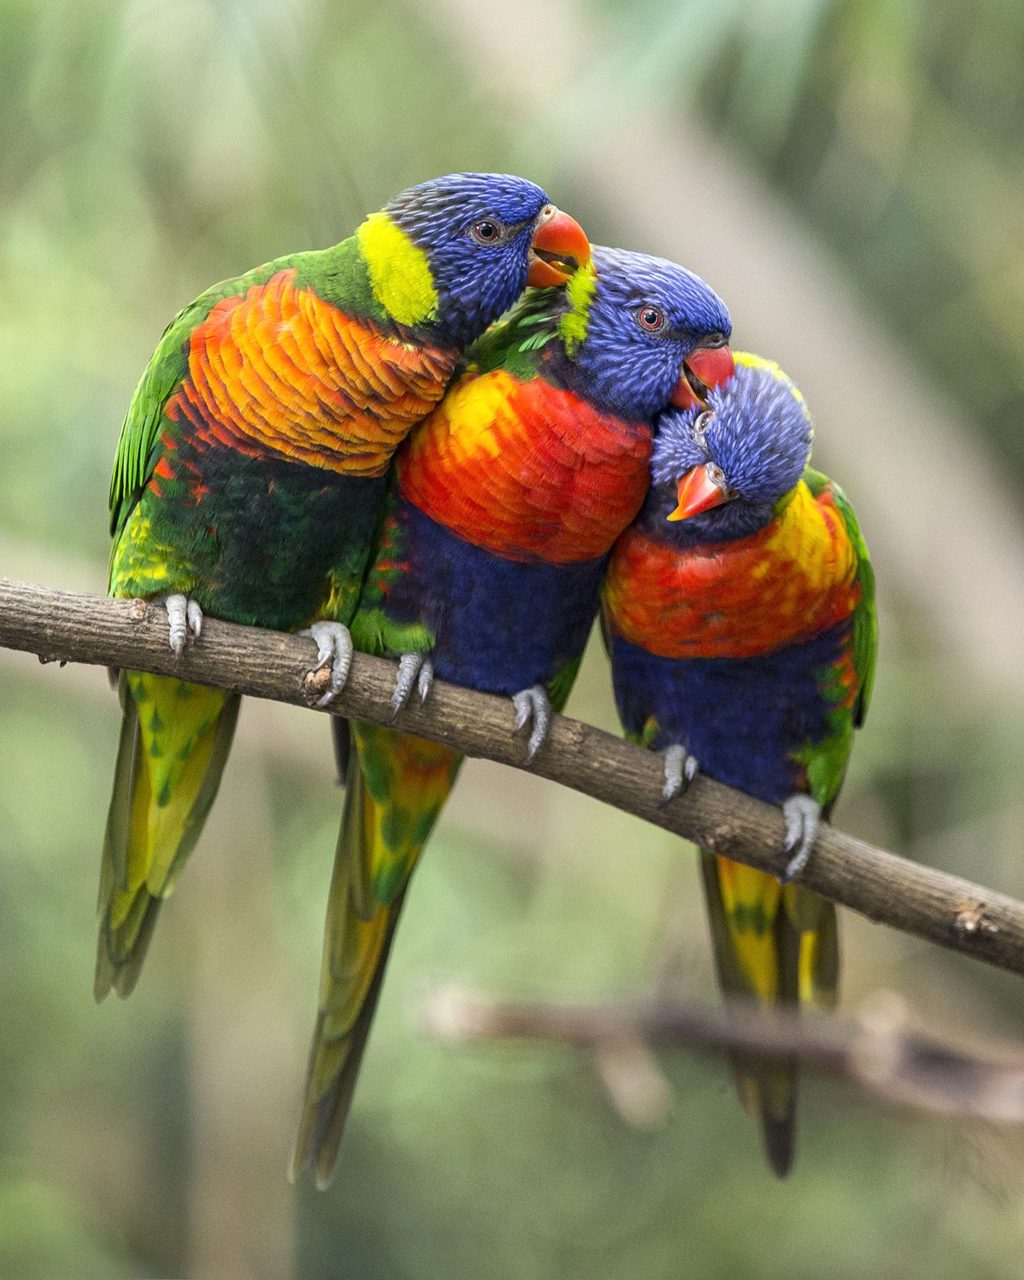 Rainbow lorikeet 1 Top 20 Most Beautiful Colorful Birds in The World - 22